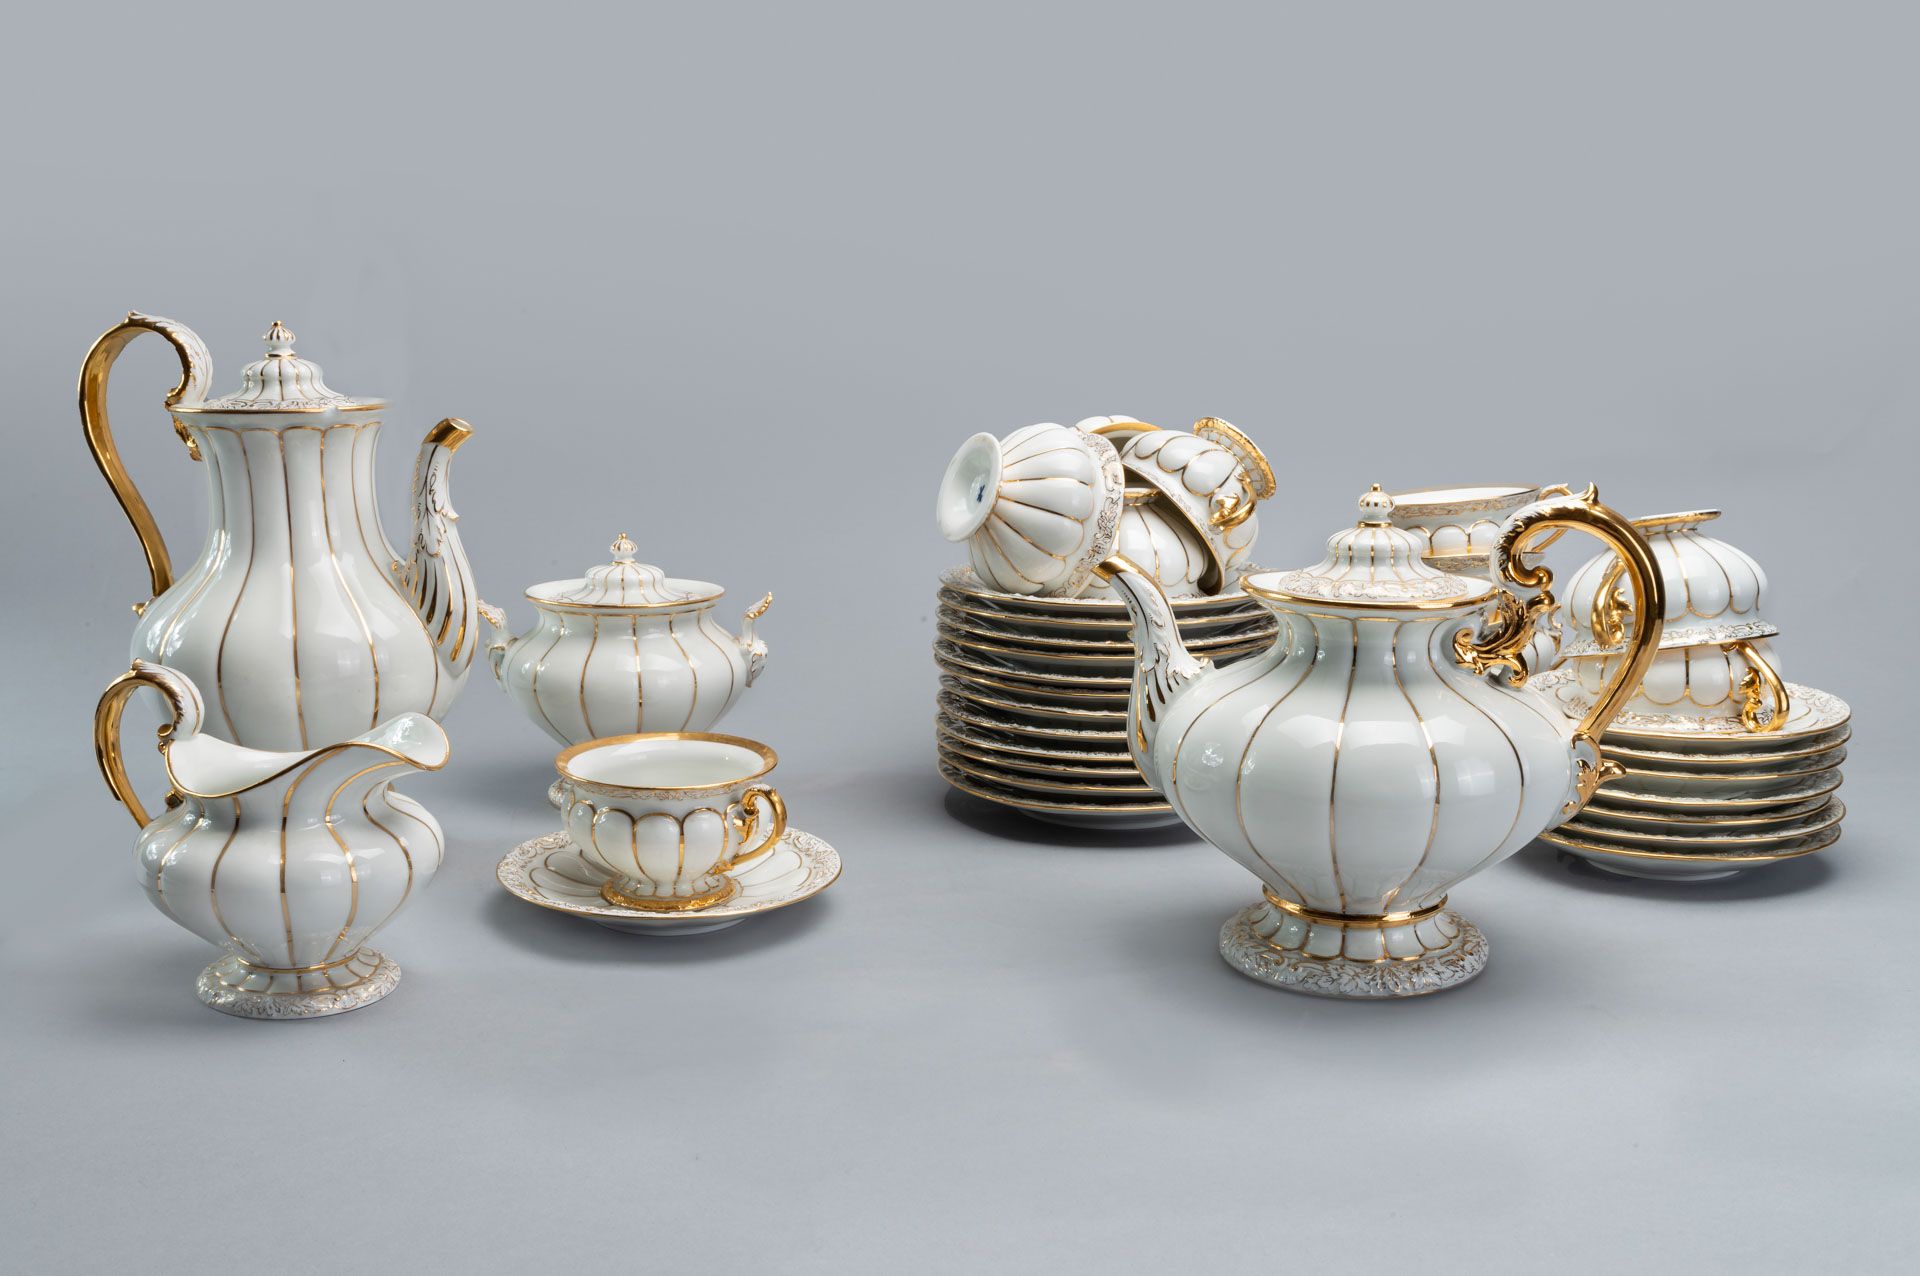 A Fine Meissen Tea and Coffee Service in White and Gold, Early 20th Century